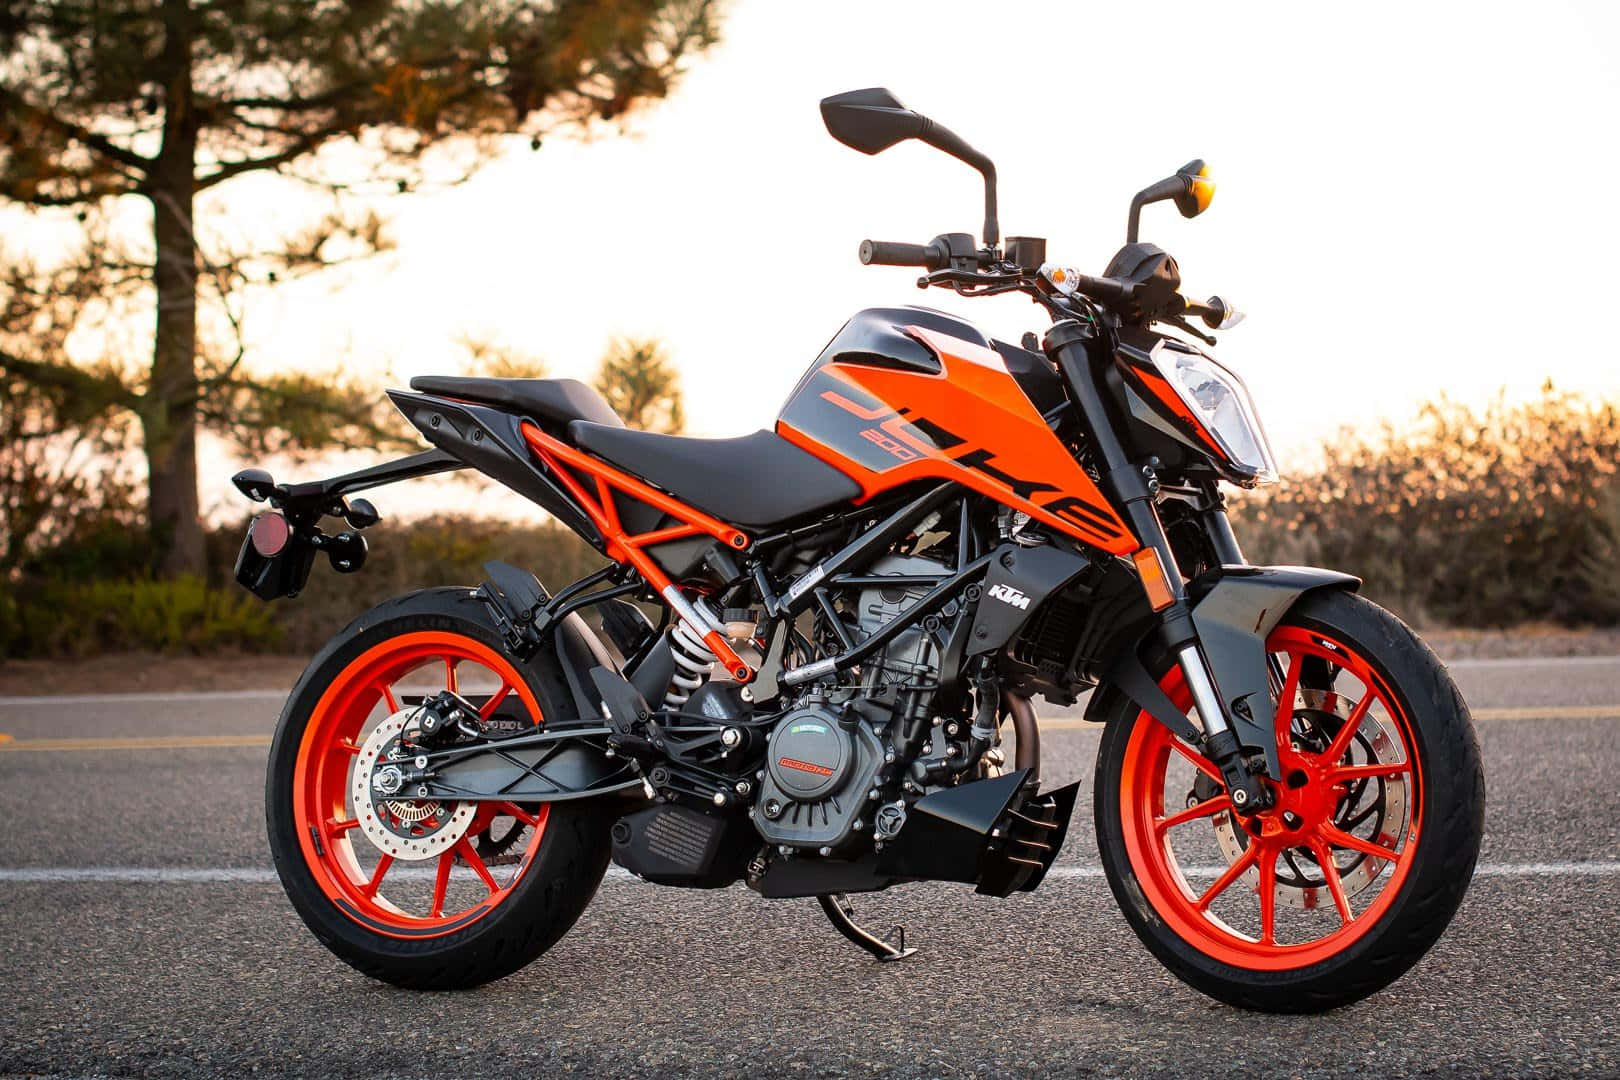 Ktm Duke 200 Motorcycle With Sunset Sky Picture